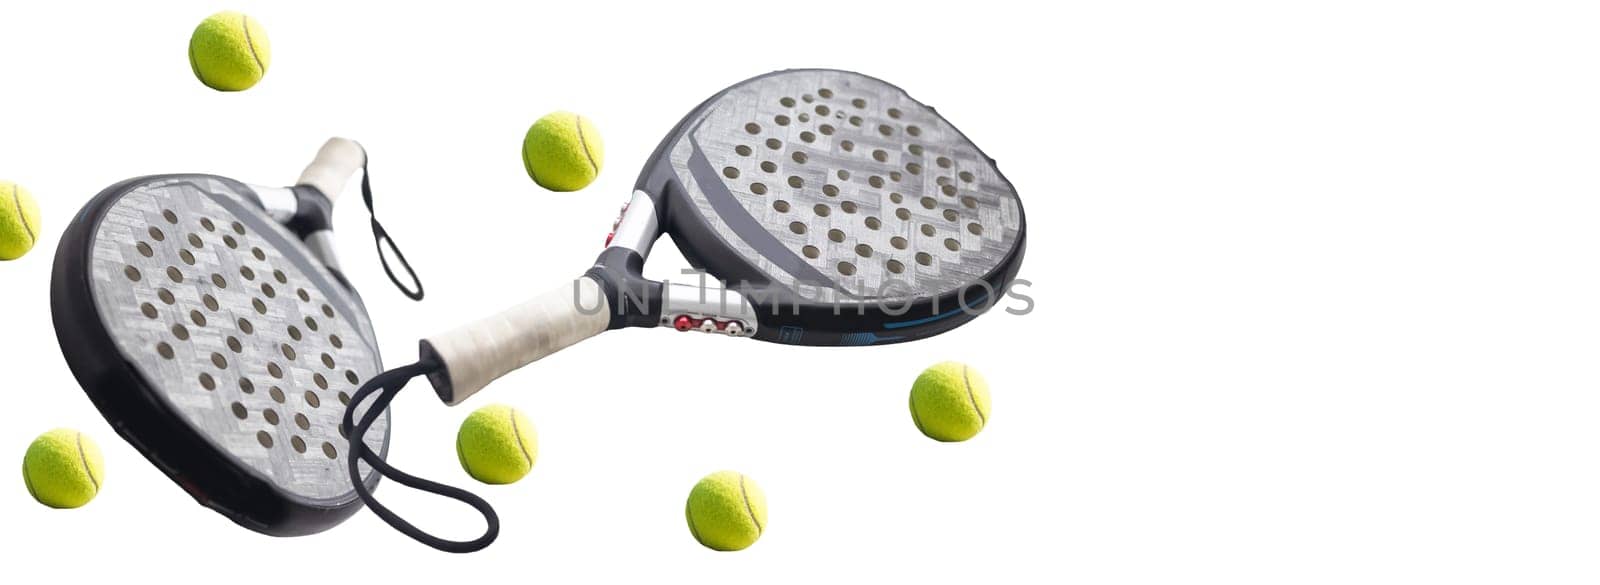 Isolated paddle tennis objects. padel racket by Andelov13